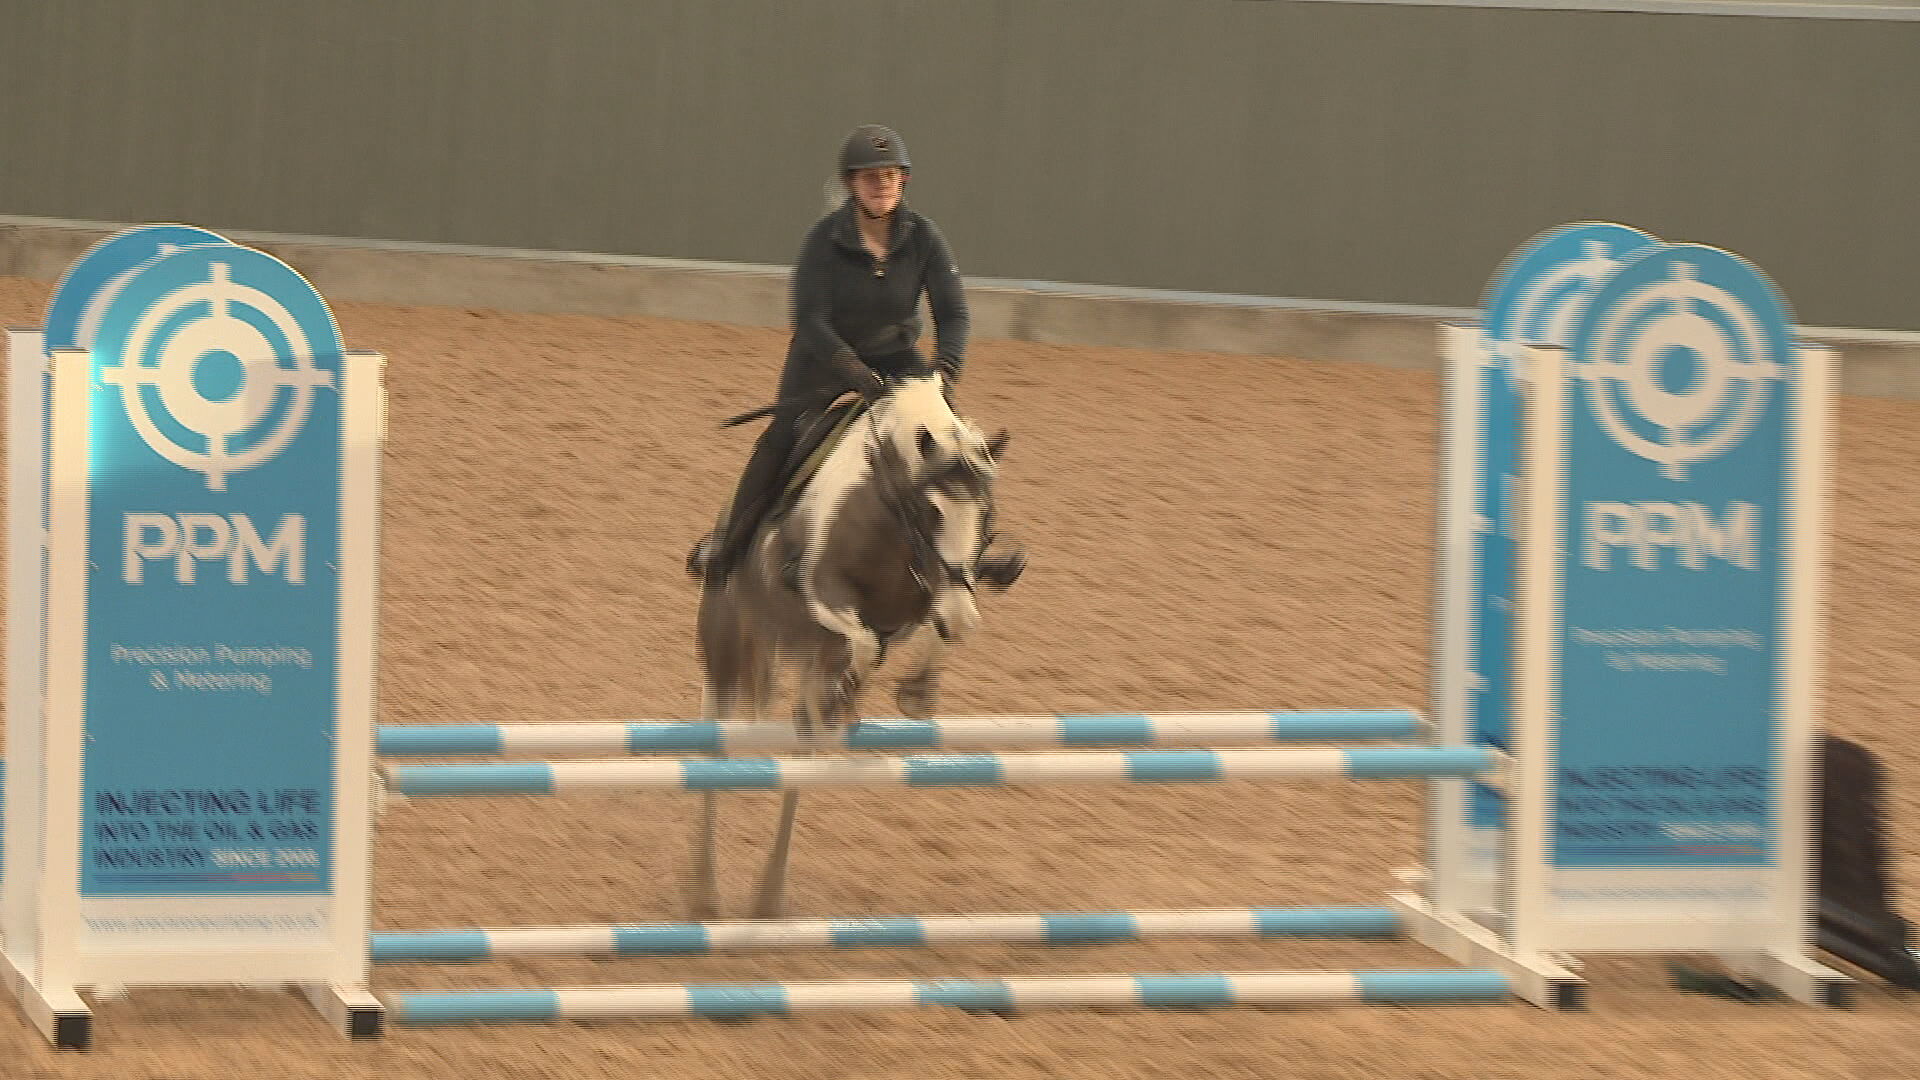 New facility billed as a 'one-stop shop' for equestrian sport